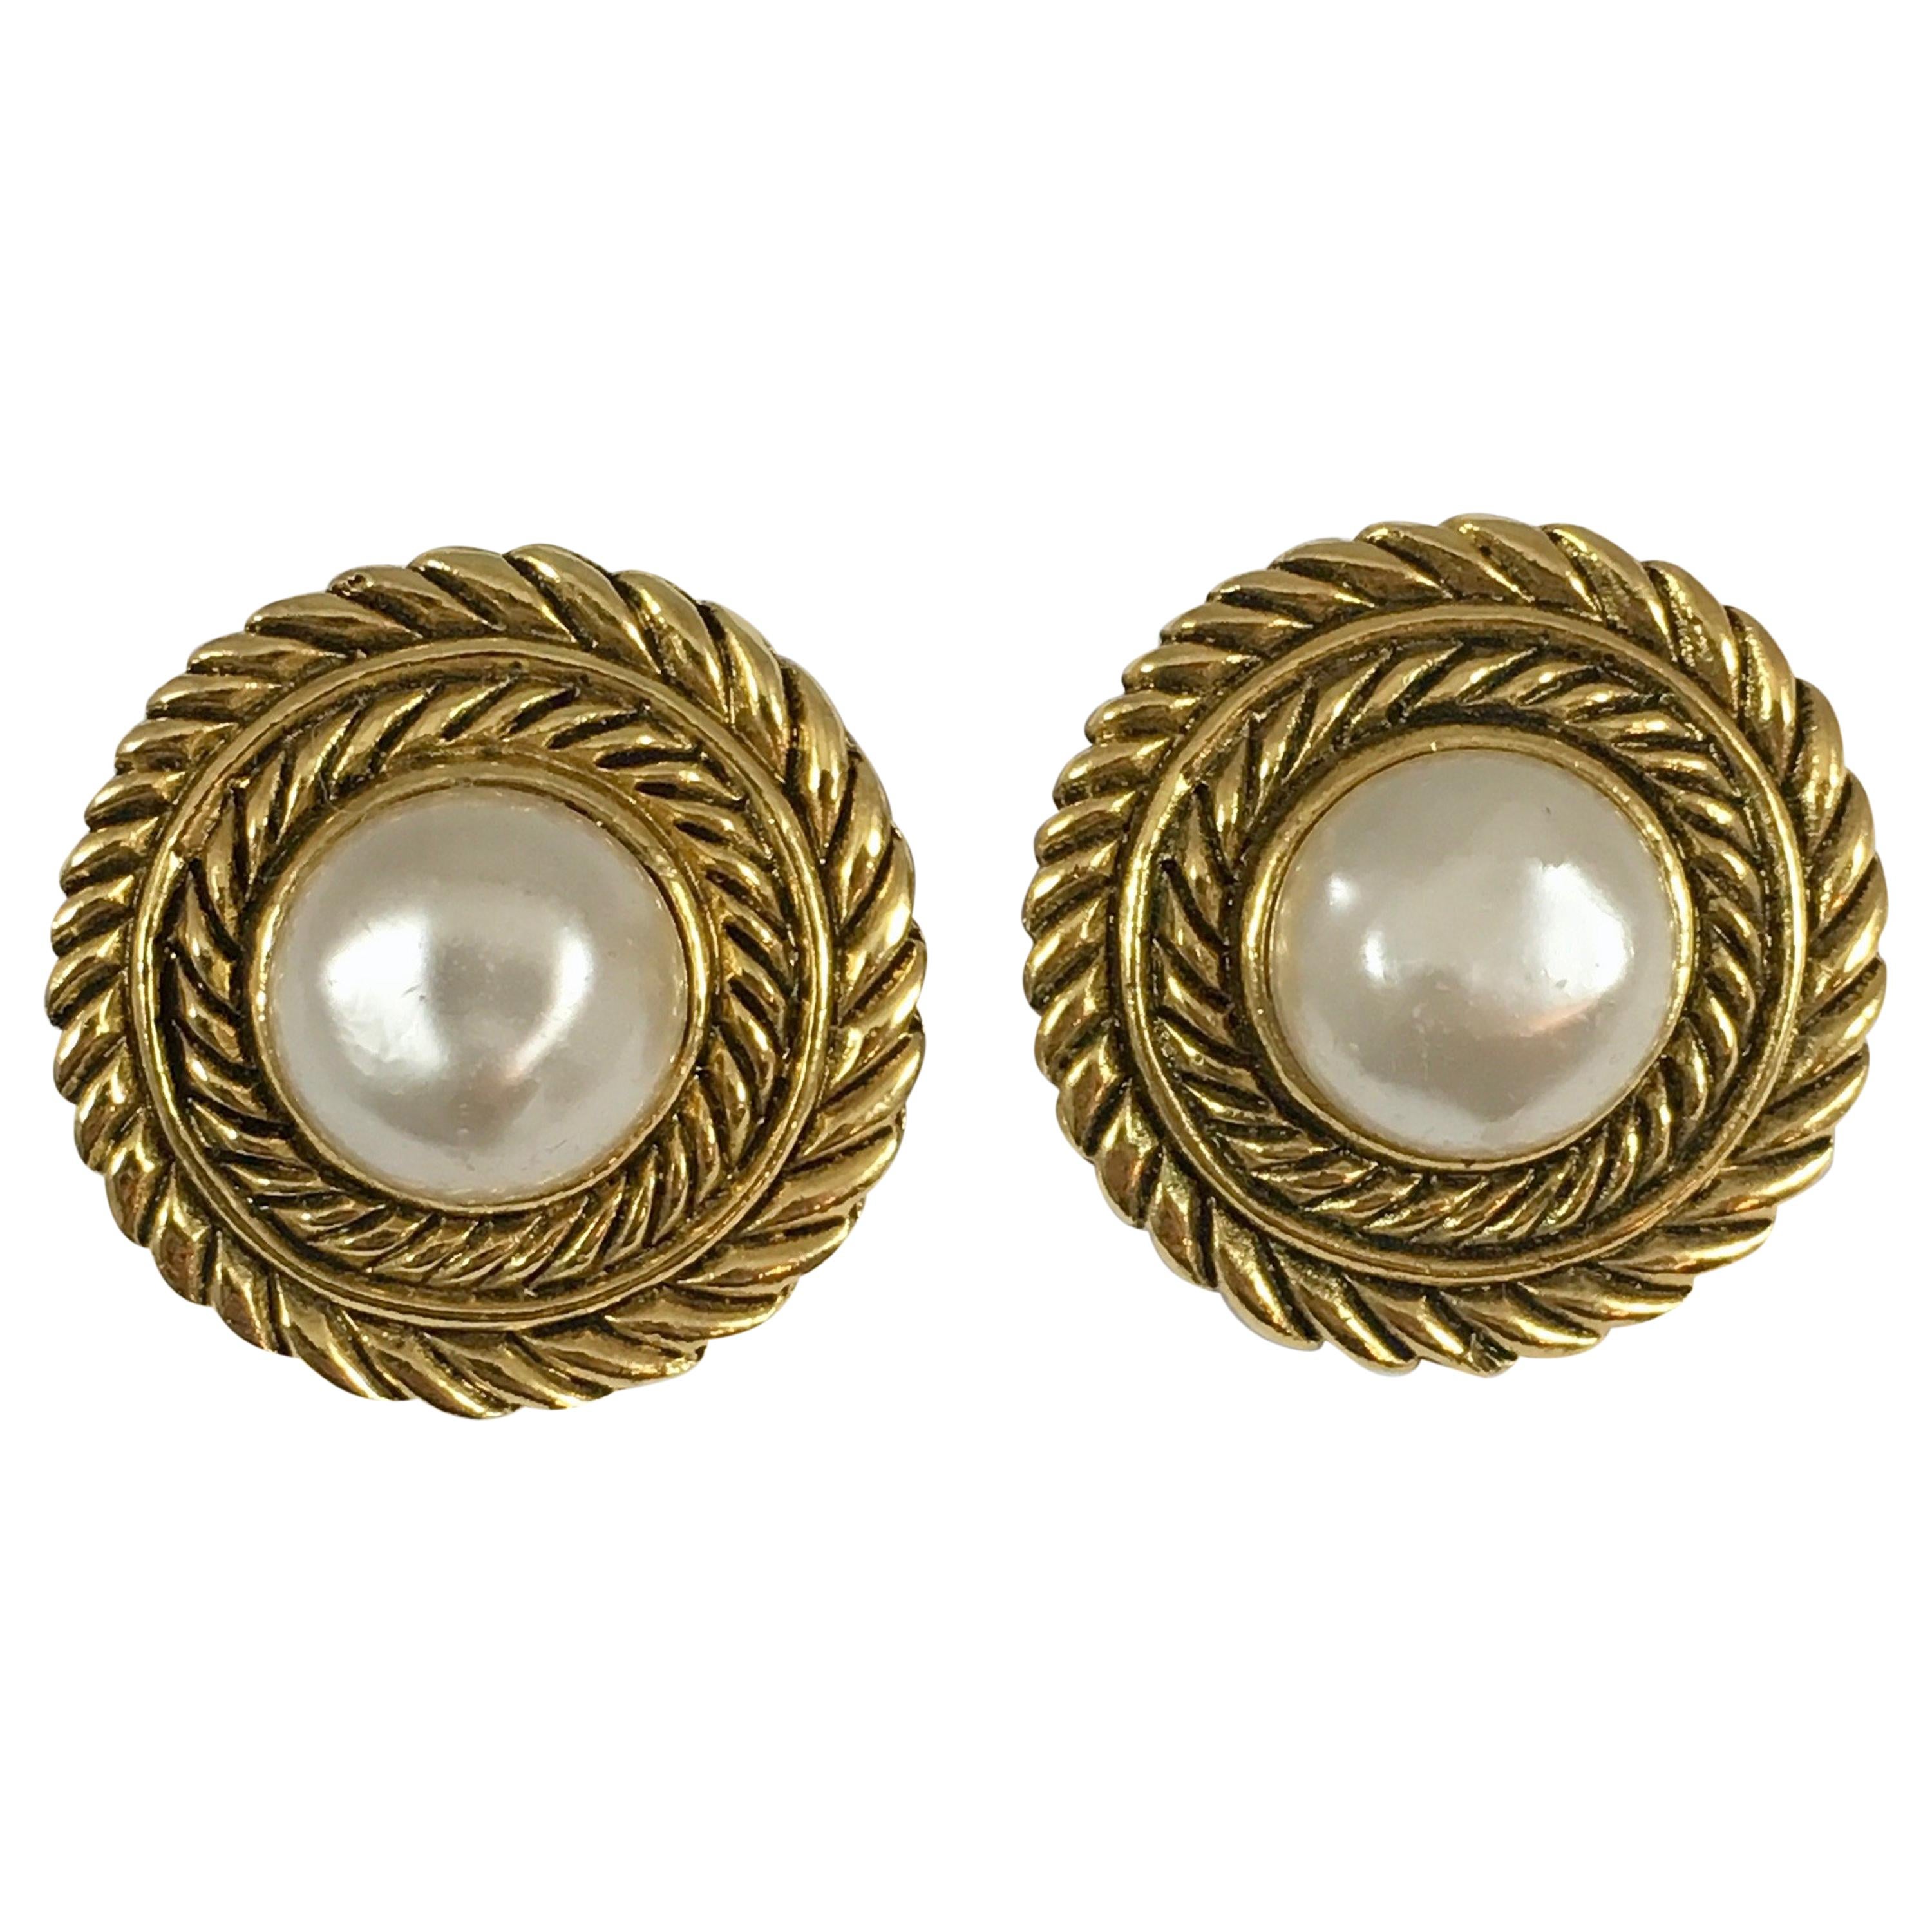 Chanel Pearl and Goldtone Clip-On Earrings in Box 1980s For Sale